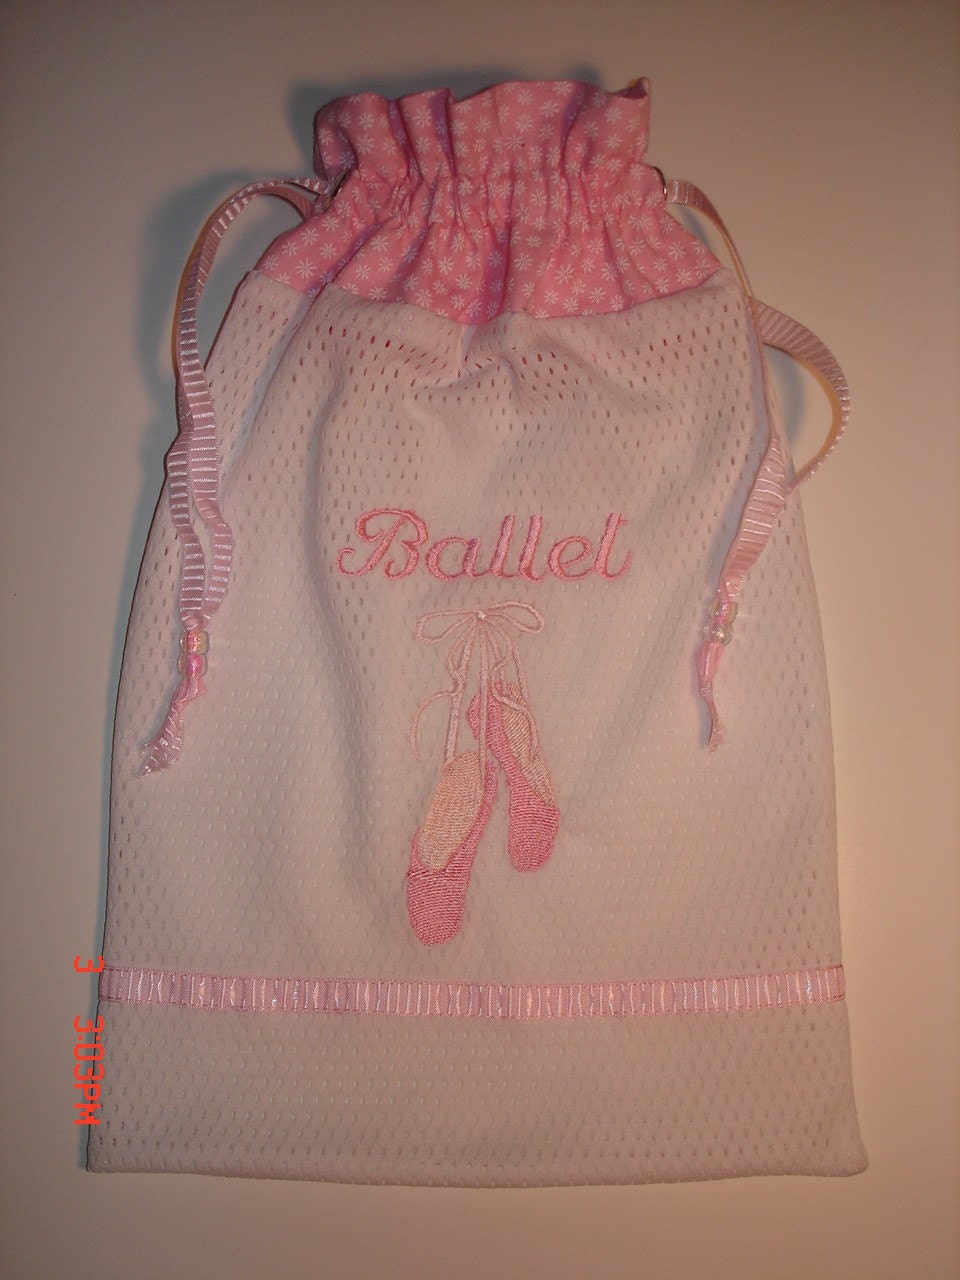 Mesh pointe/ballet dance shoe bag with embroidered pointe shoes and the word "Ballet" also embroidered on the bag